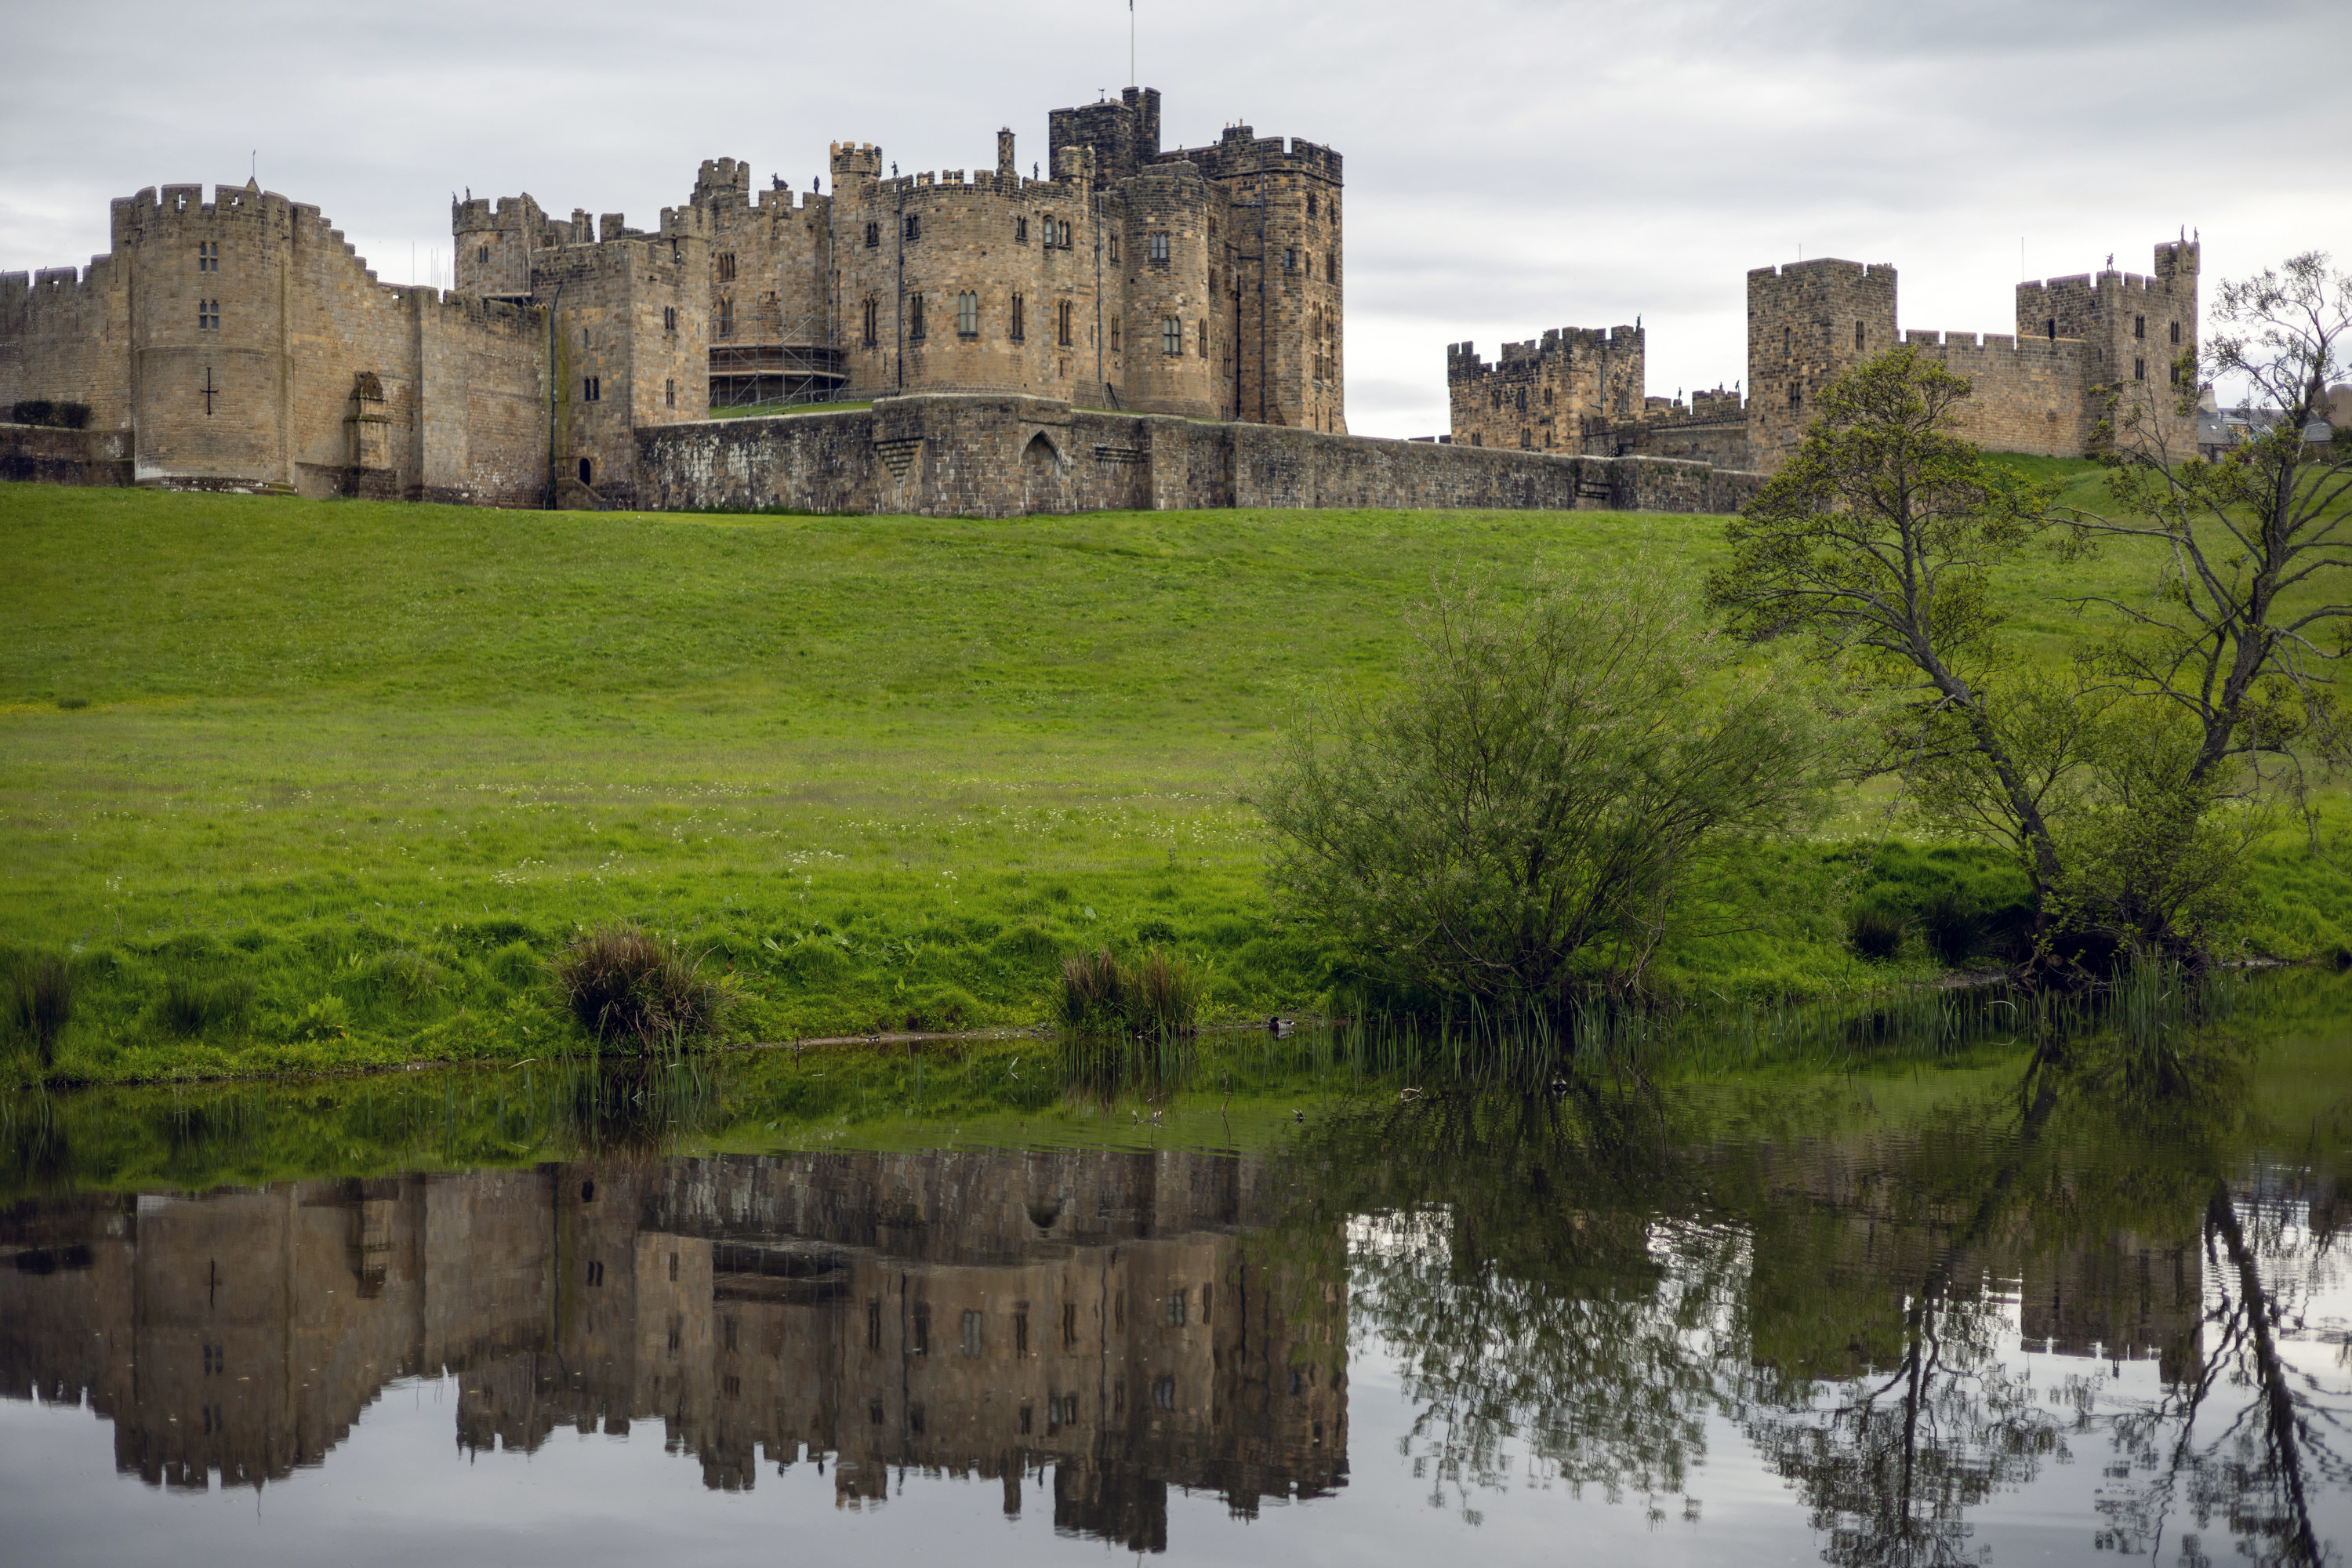 Scenic landscape of Alnwick Castle and the River Aln on overcast day, Northumberland, England, United Kingdom